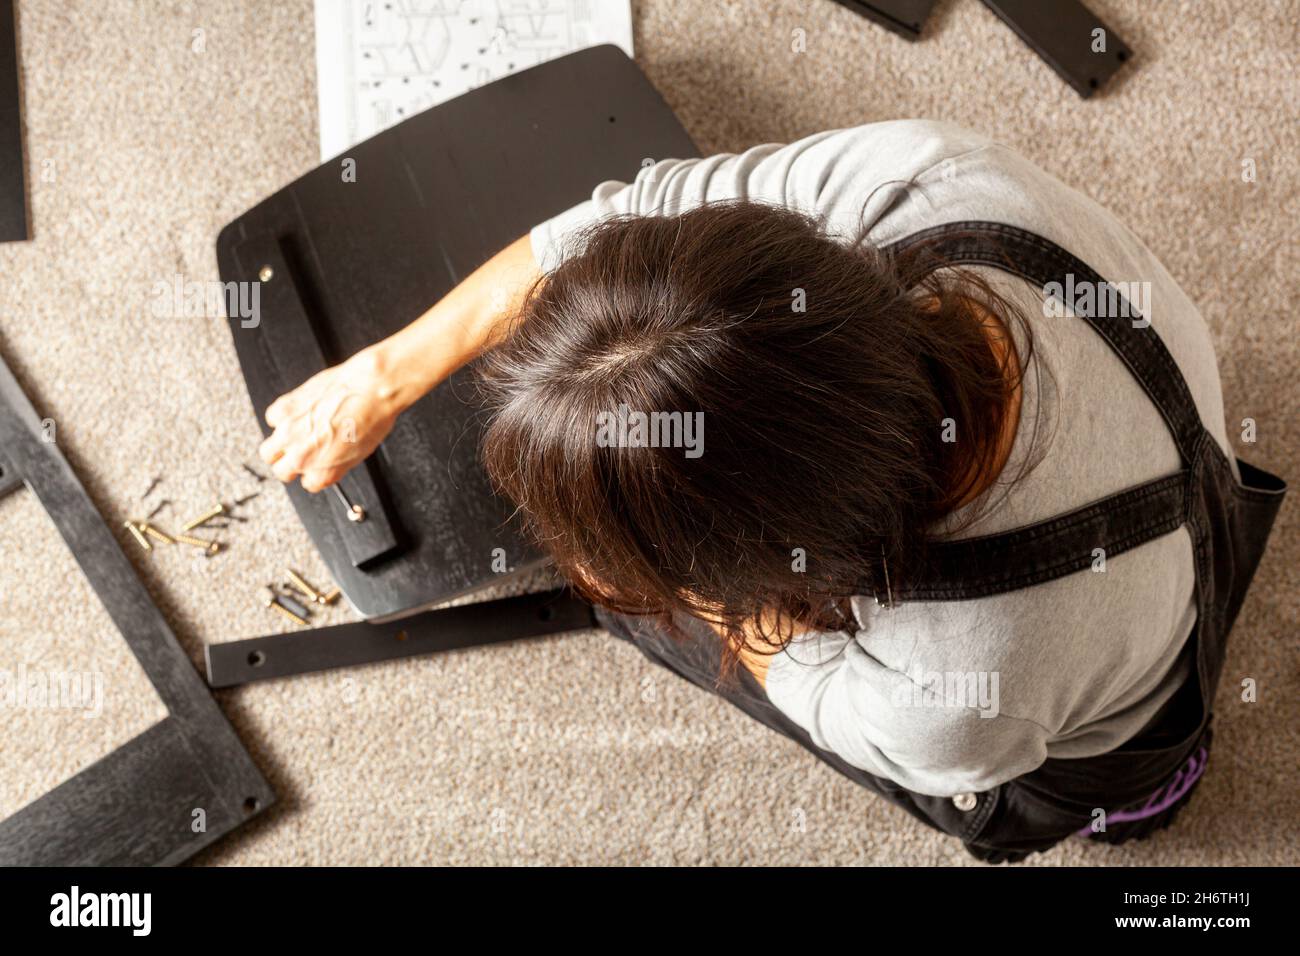 DIY furniture assembly concept including a caucasian person sitting on carpet floor with pieces of furniture, trying to assemble it based on instructi Stock Photo